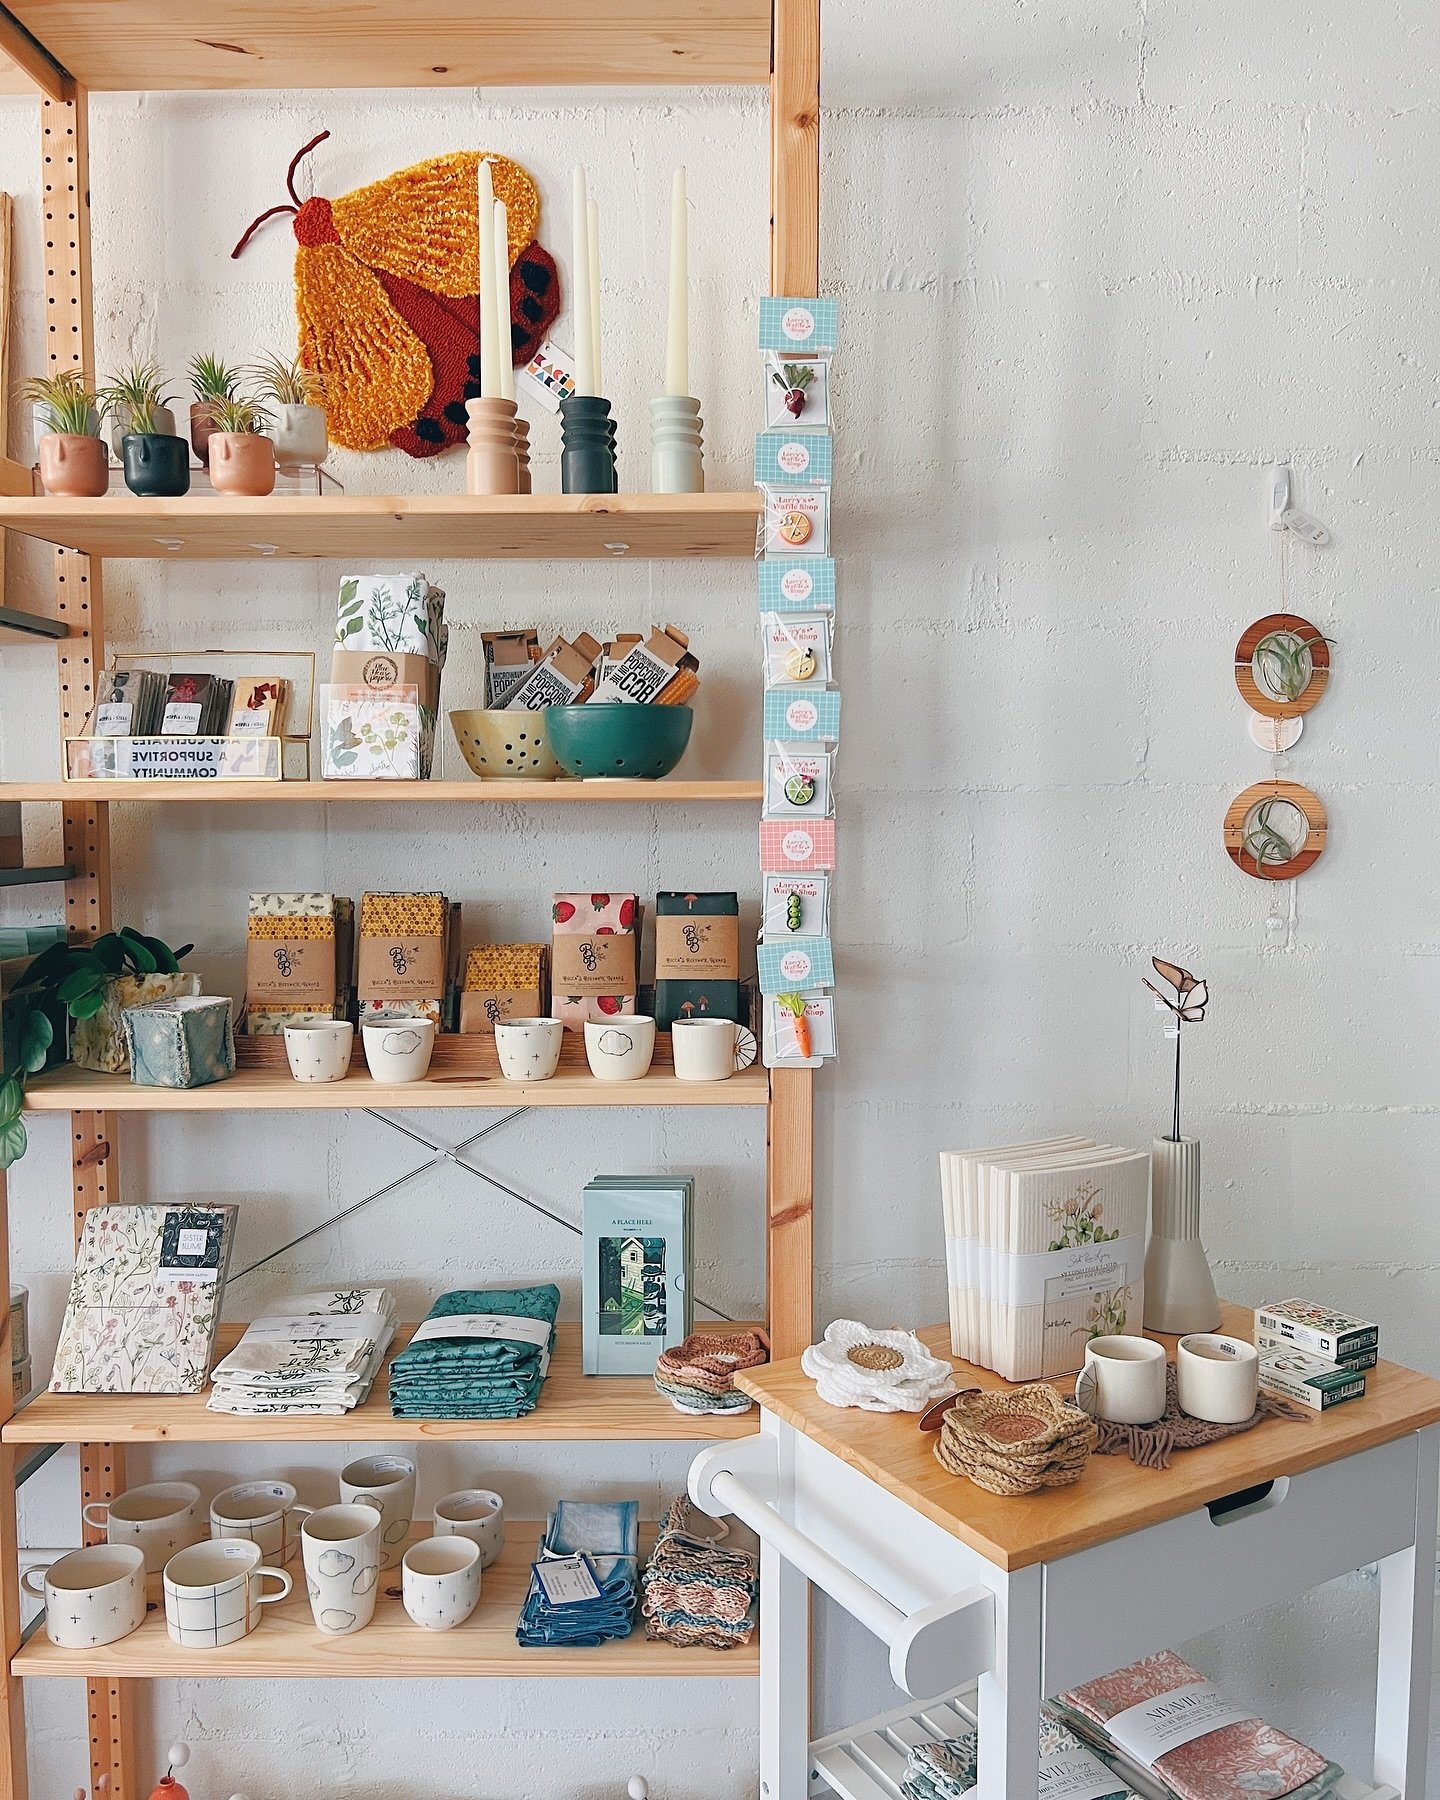 It may be dreary outside, but we&rsquo;ve captured plenty of sunshine in the pop up! Come shop 11am-5pm.

ALL THE DETAILS
🌷The Spring Pop Up Shop will be open weekends from April 19 - May 12. Shop Fridays, Saturdays, and Sundays, 11am-5pm. 
💳 Card 